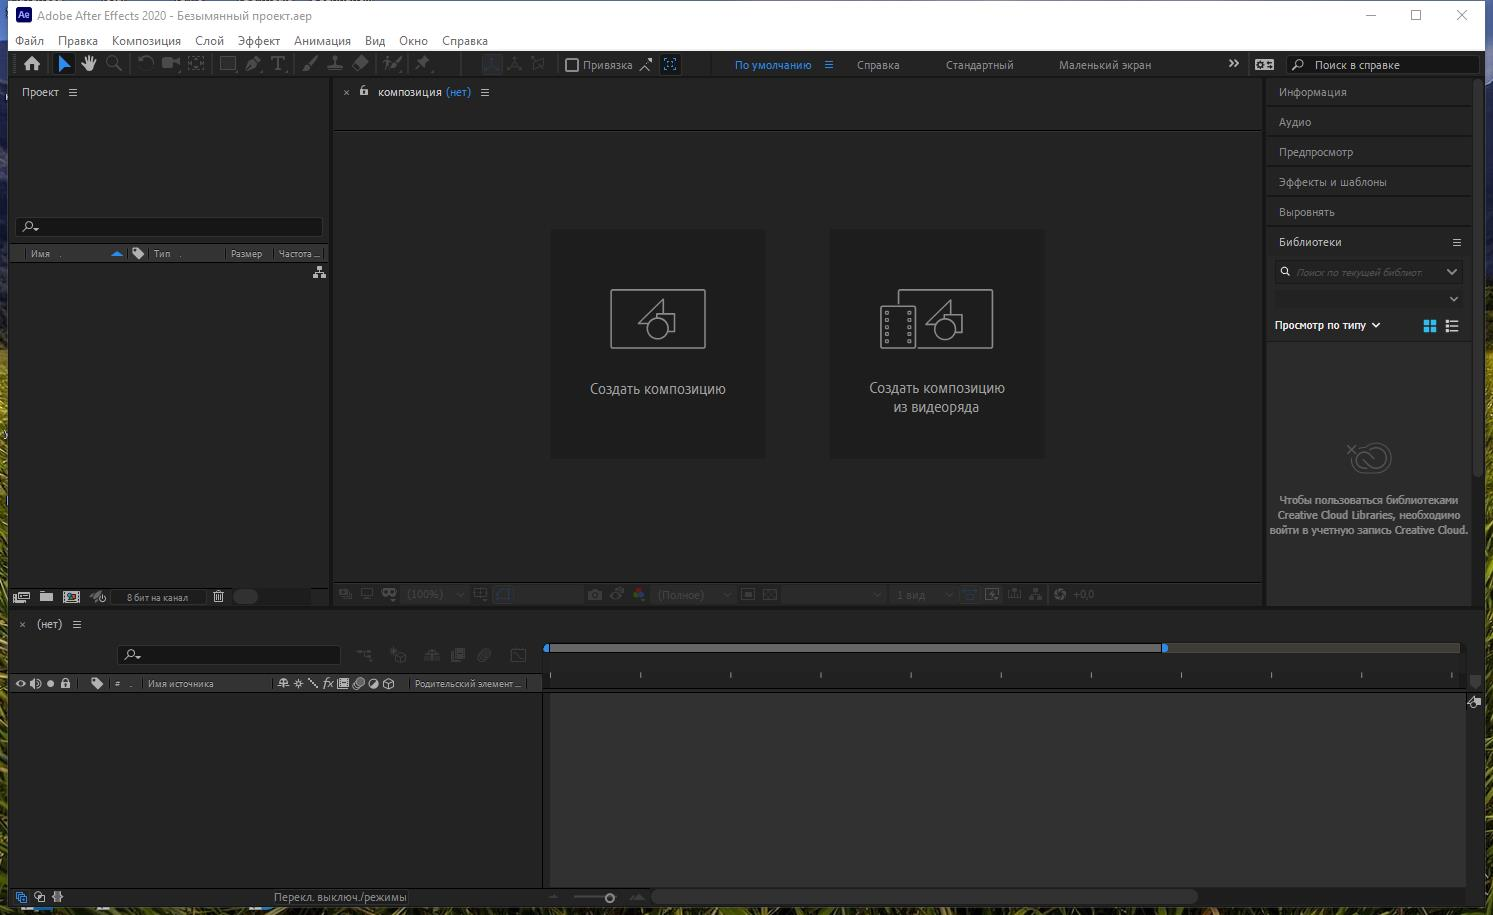 After effects работа. Меню адоб Афтер эффект. Adobe after Effects 2022. Adobe after Effects 202. Проекты after Effects.